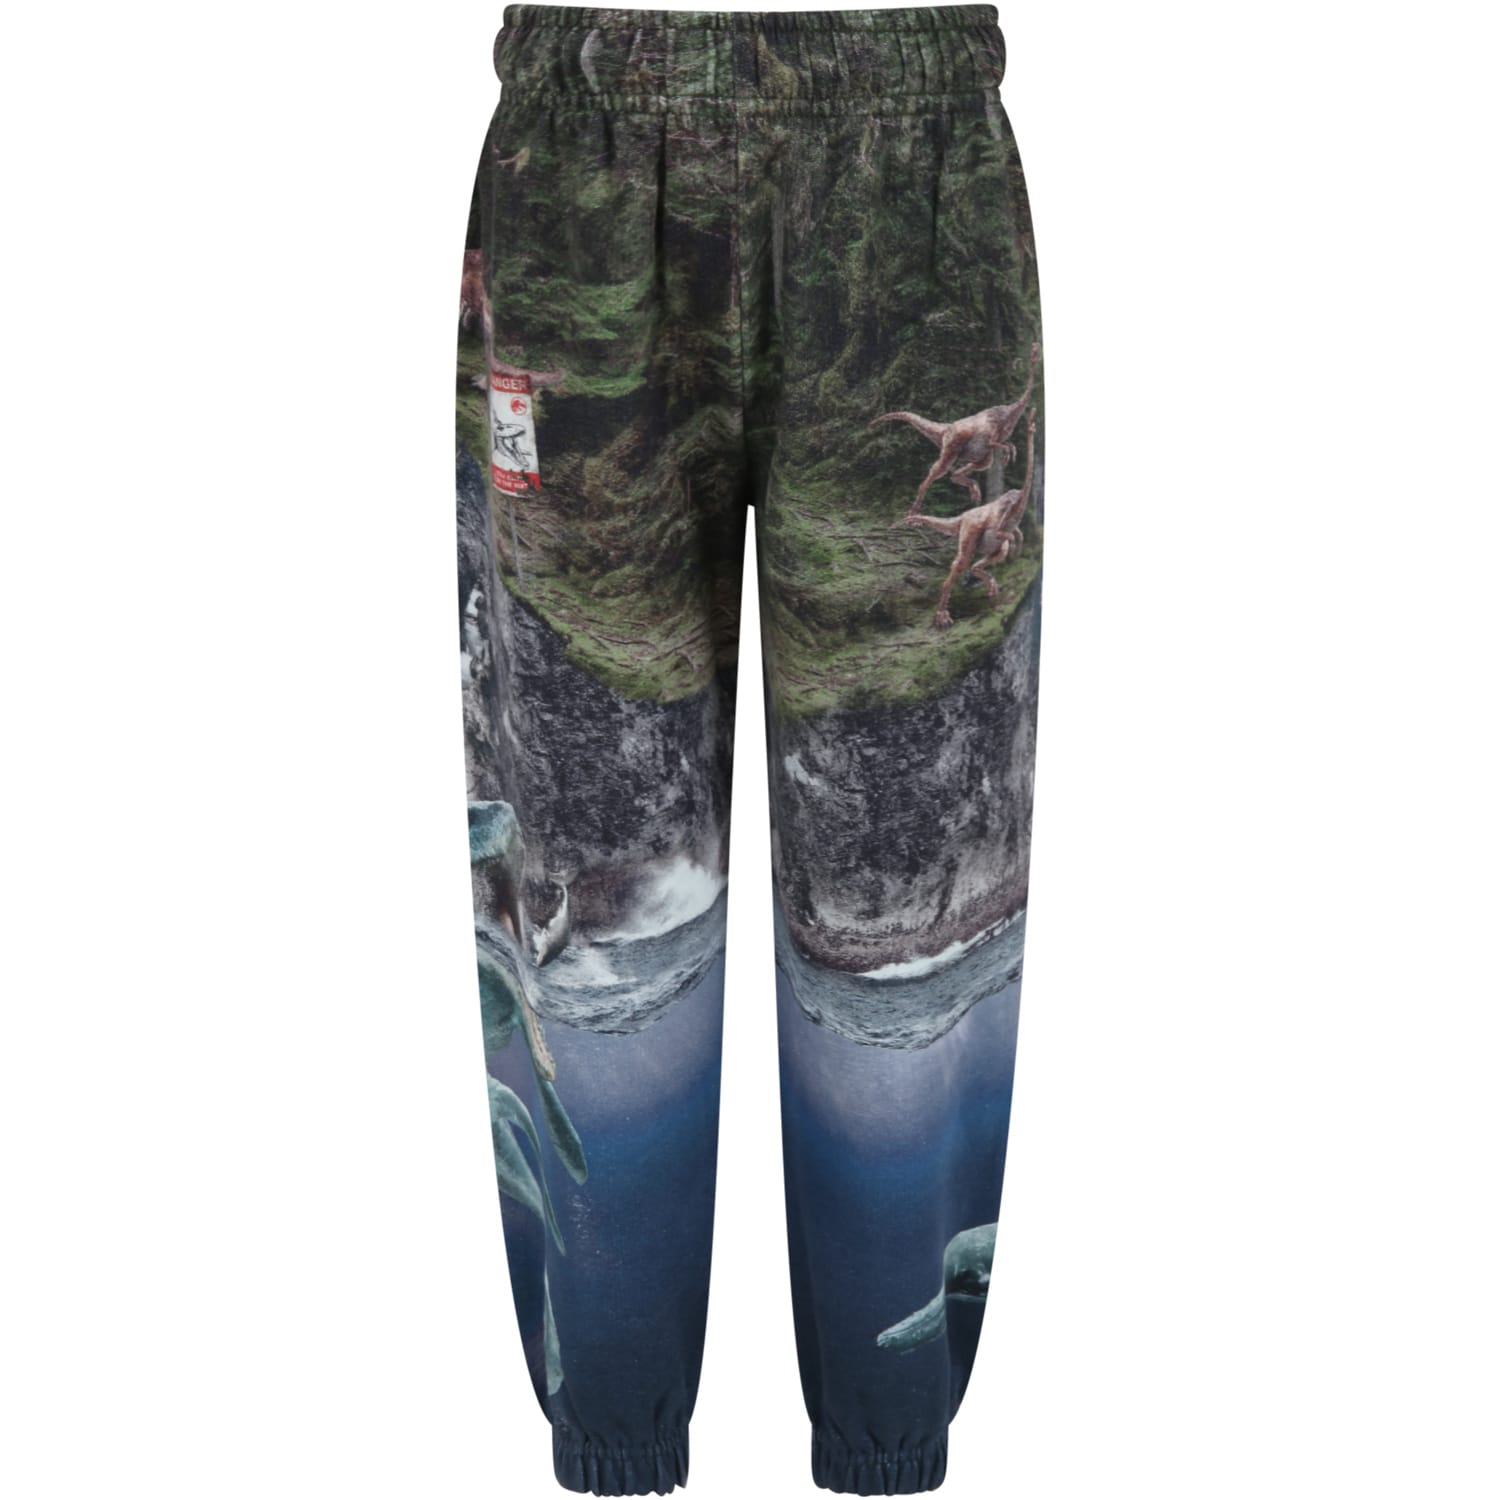 Molo Multicolor Sweatpants For Boy With Colorful Print